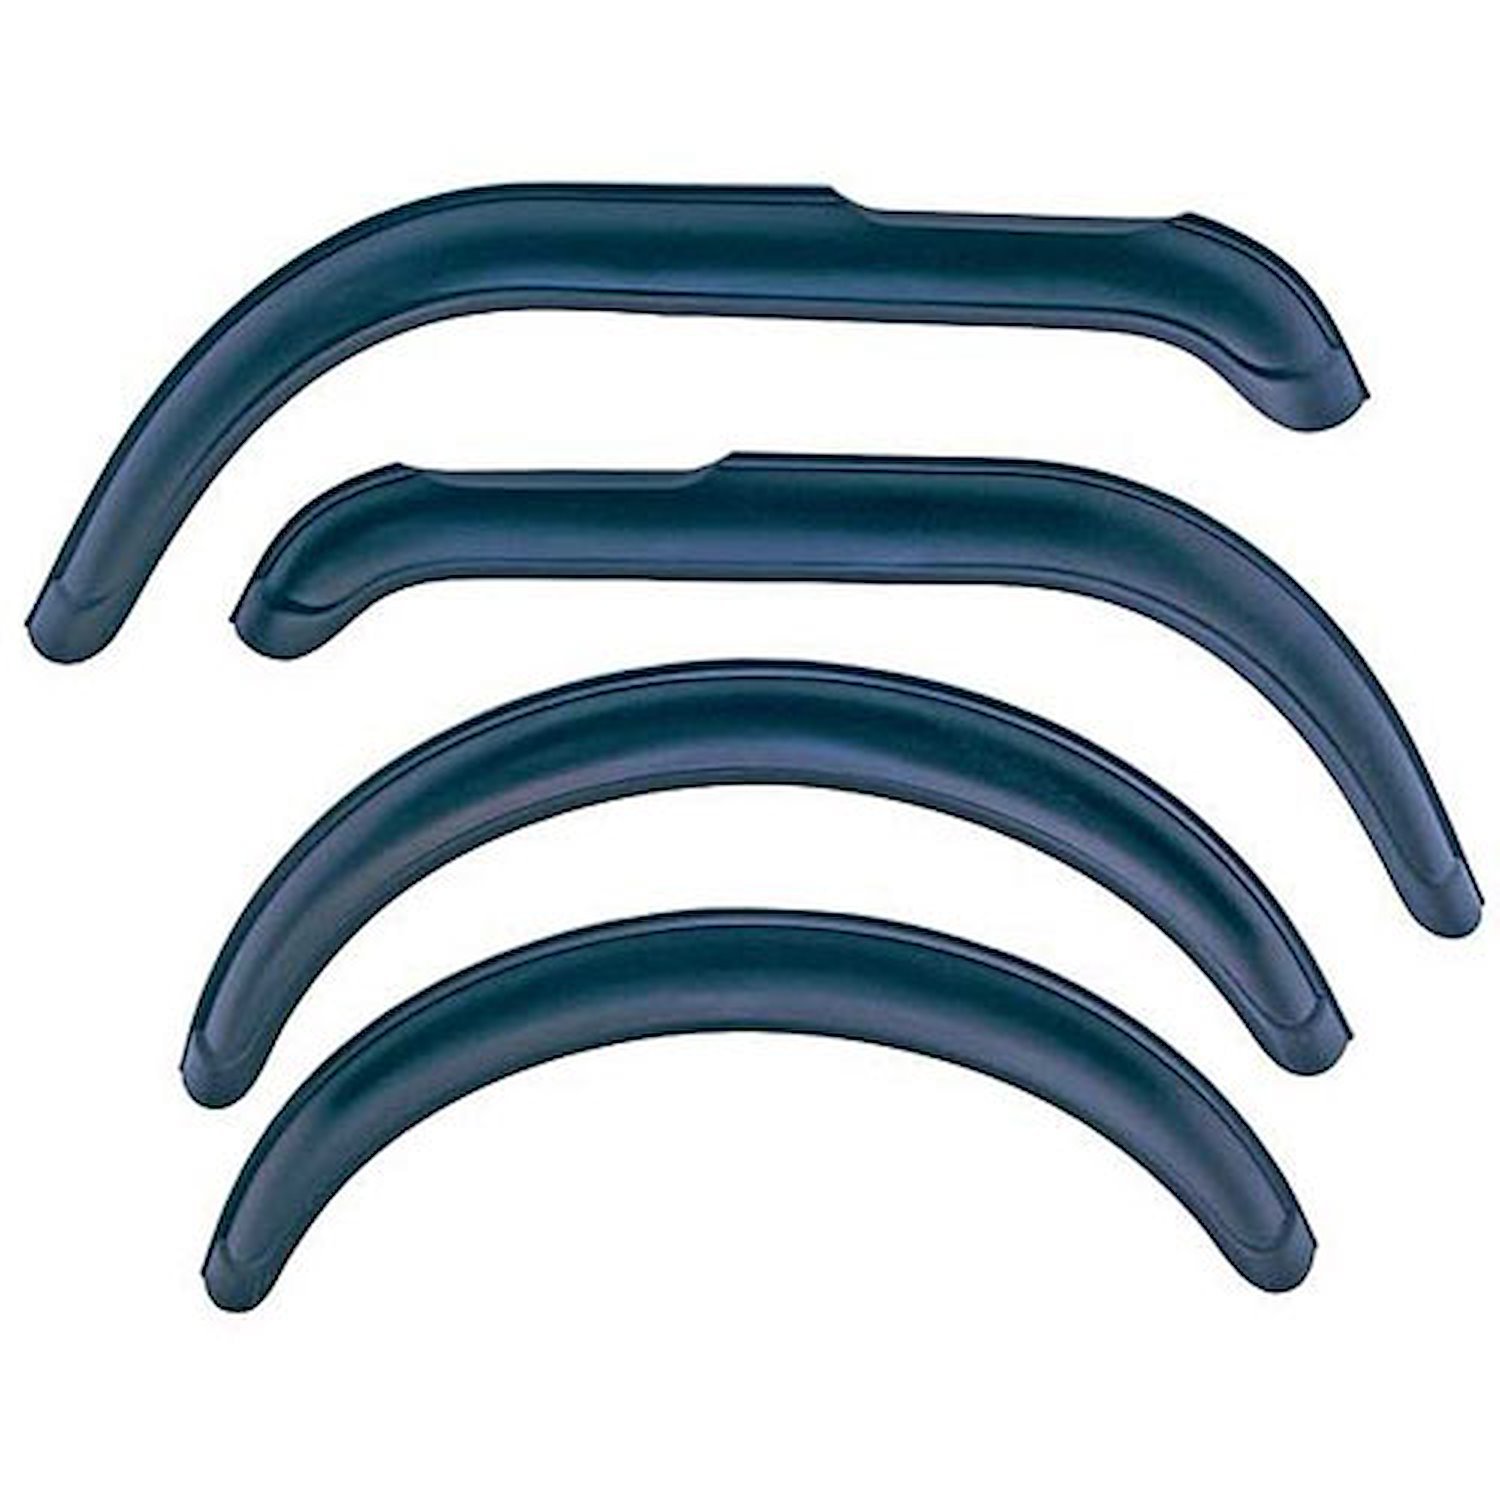 OE Style Fender Flare Kit for Select 1955-86 Jeep CJ Models [4-Piece]